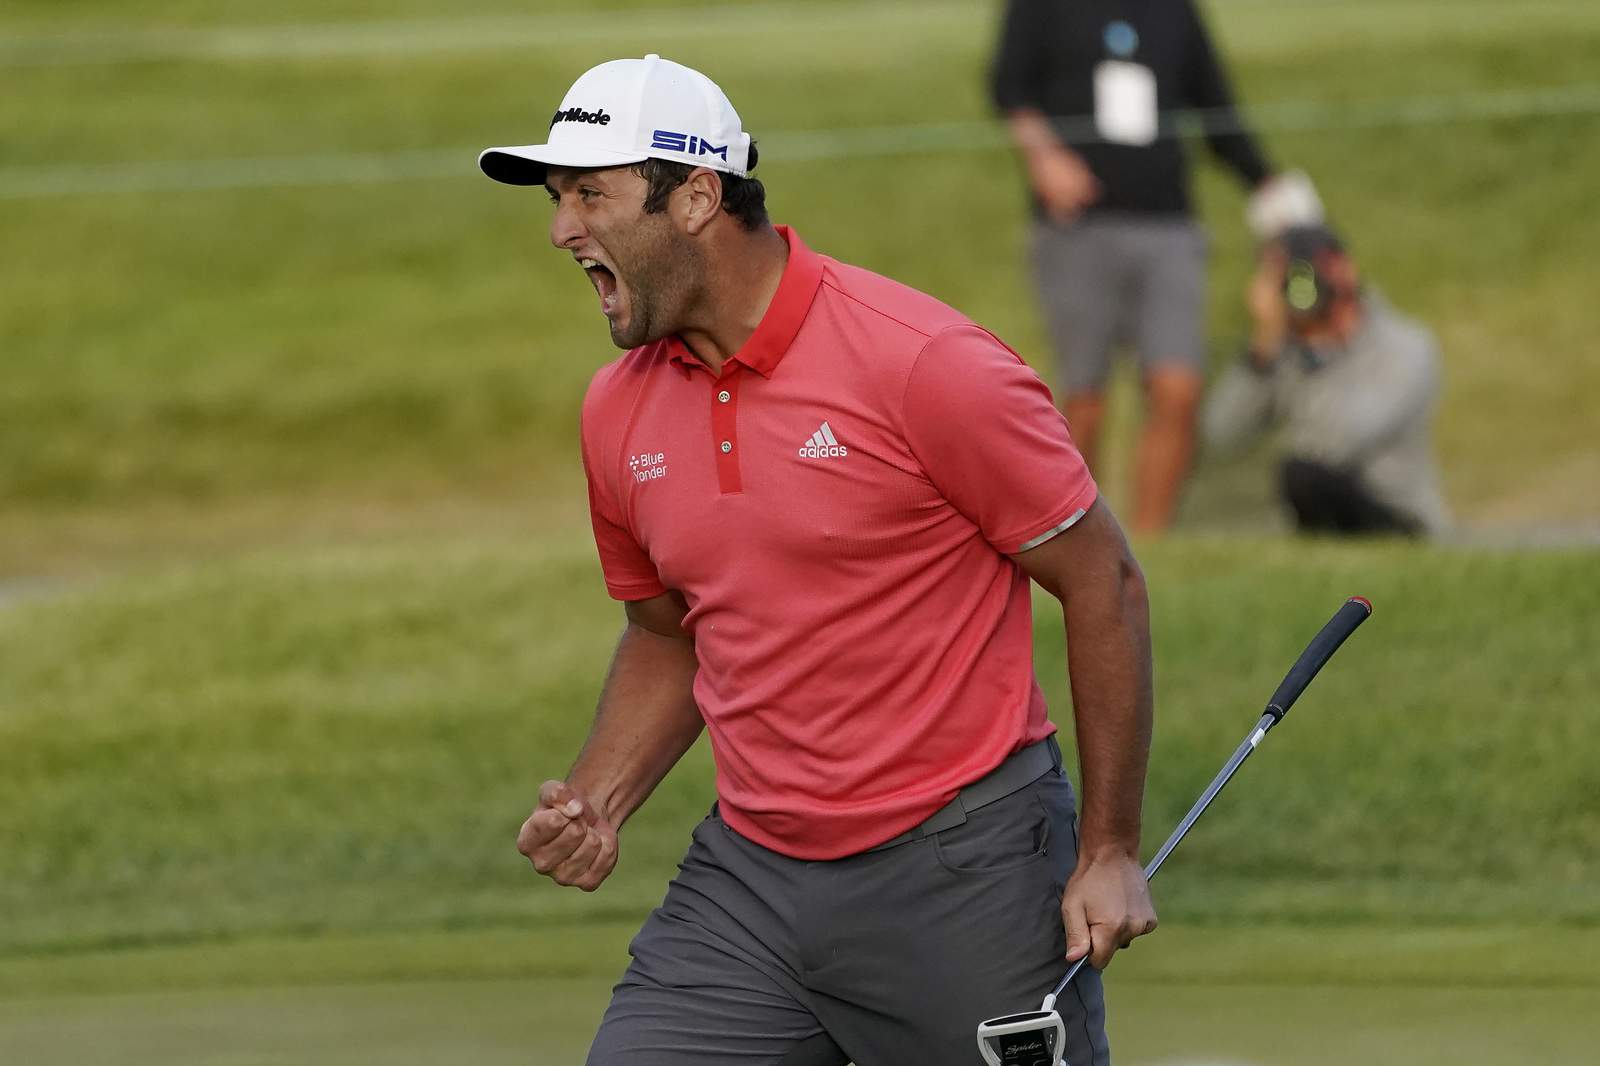 Rahm's makes the biggest putt to win a thriller at BMW